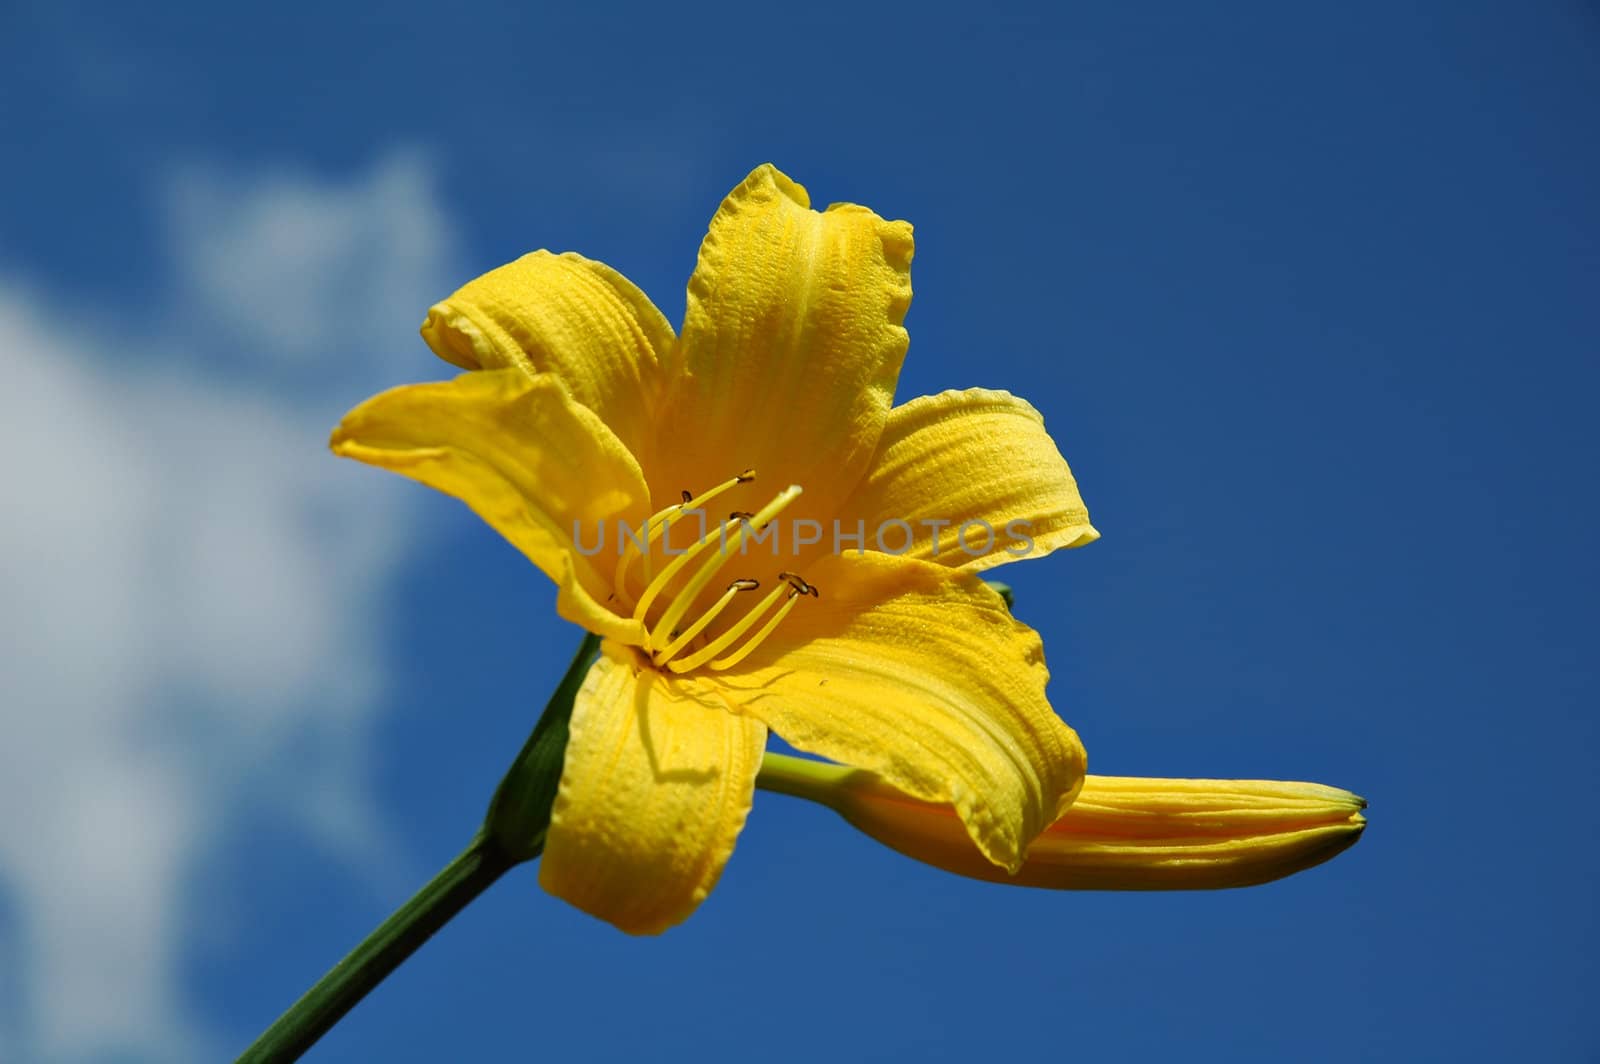 Flower yellow lily against background of blue sky